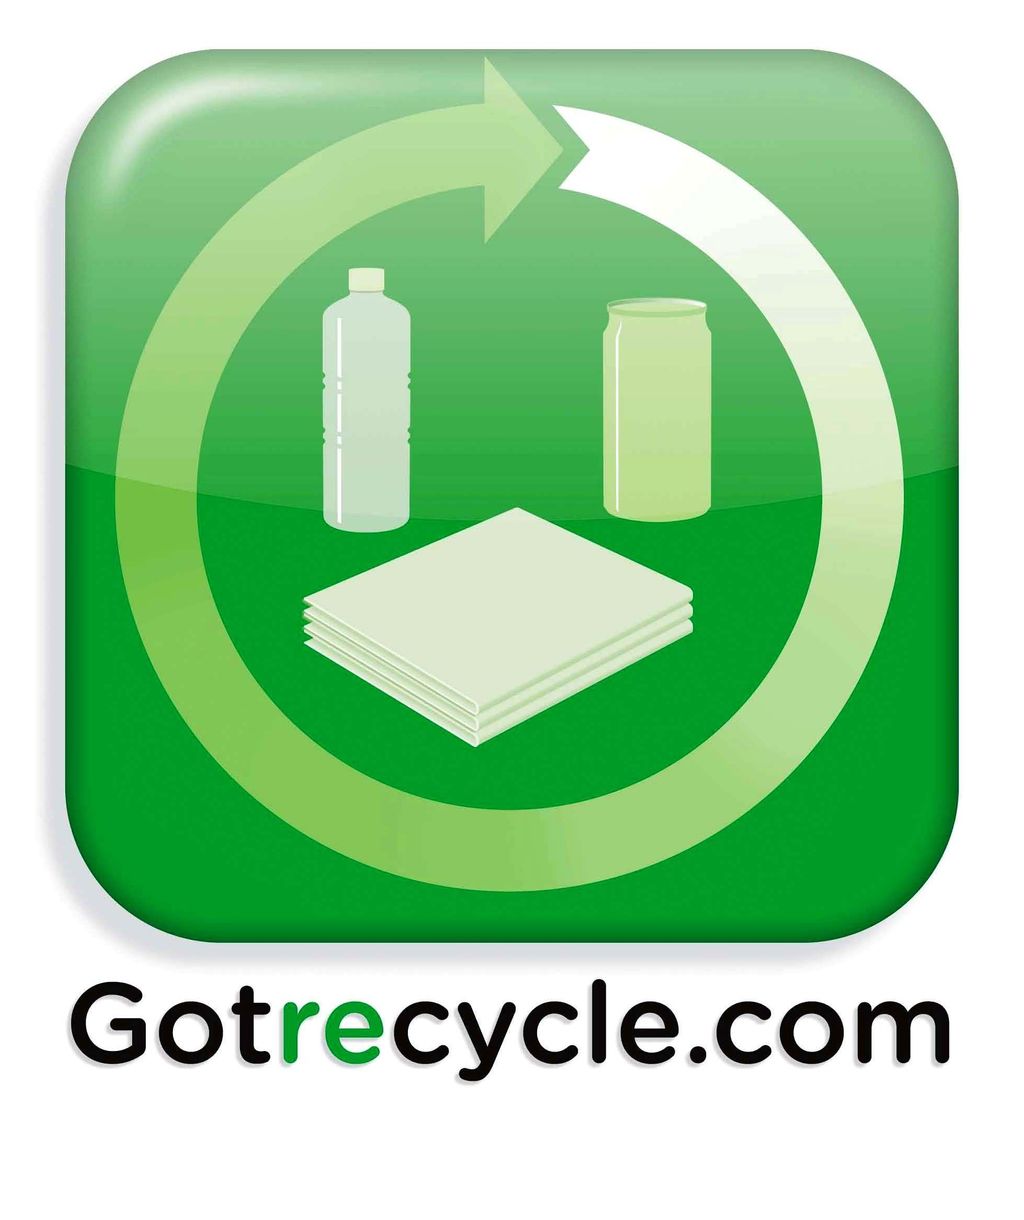 Got Recycle?